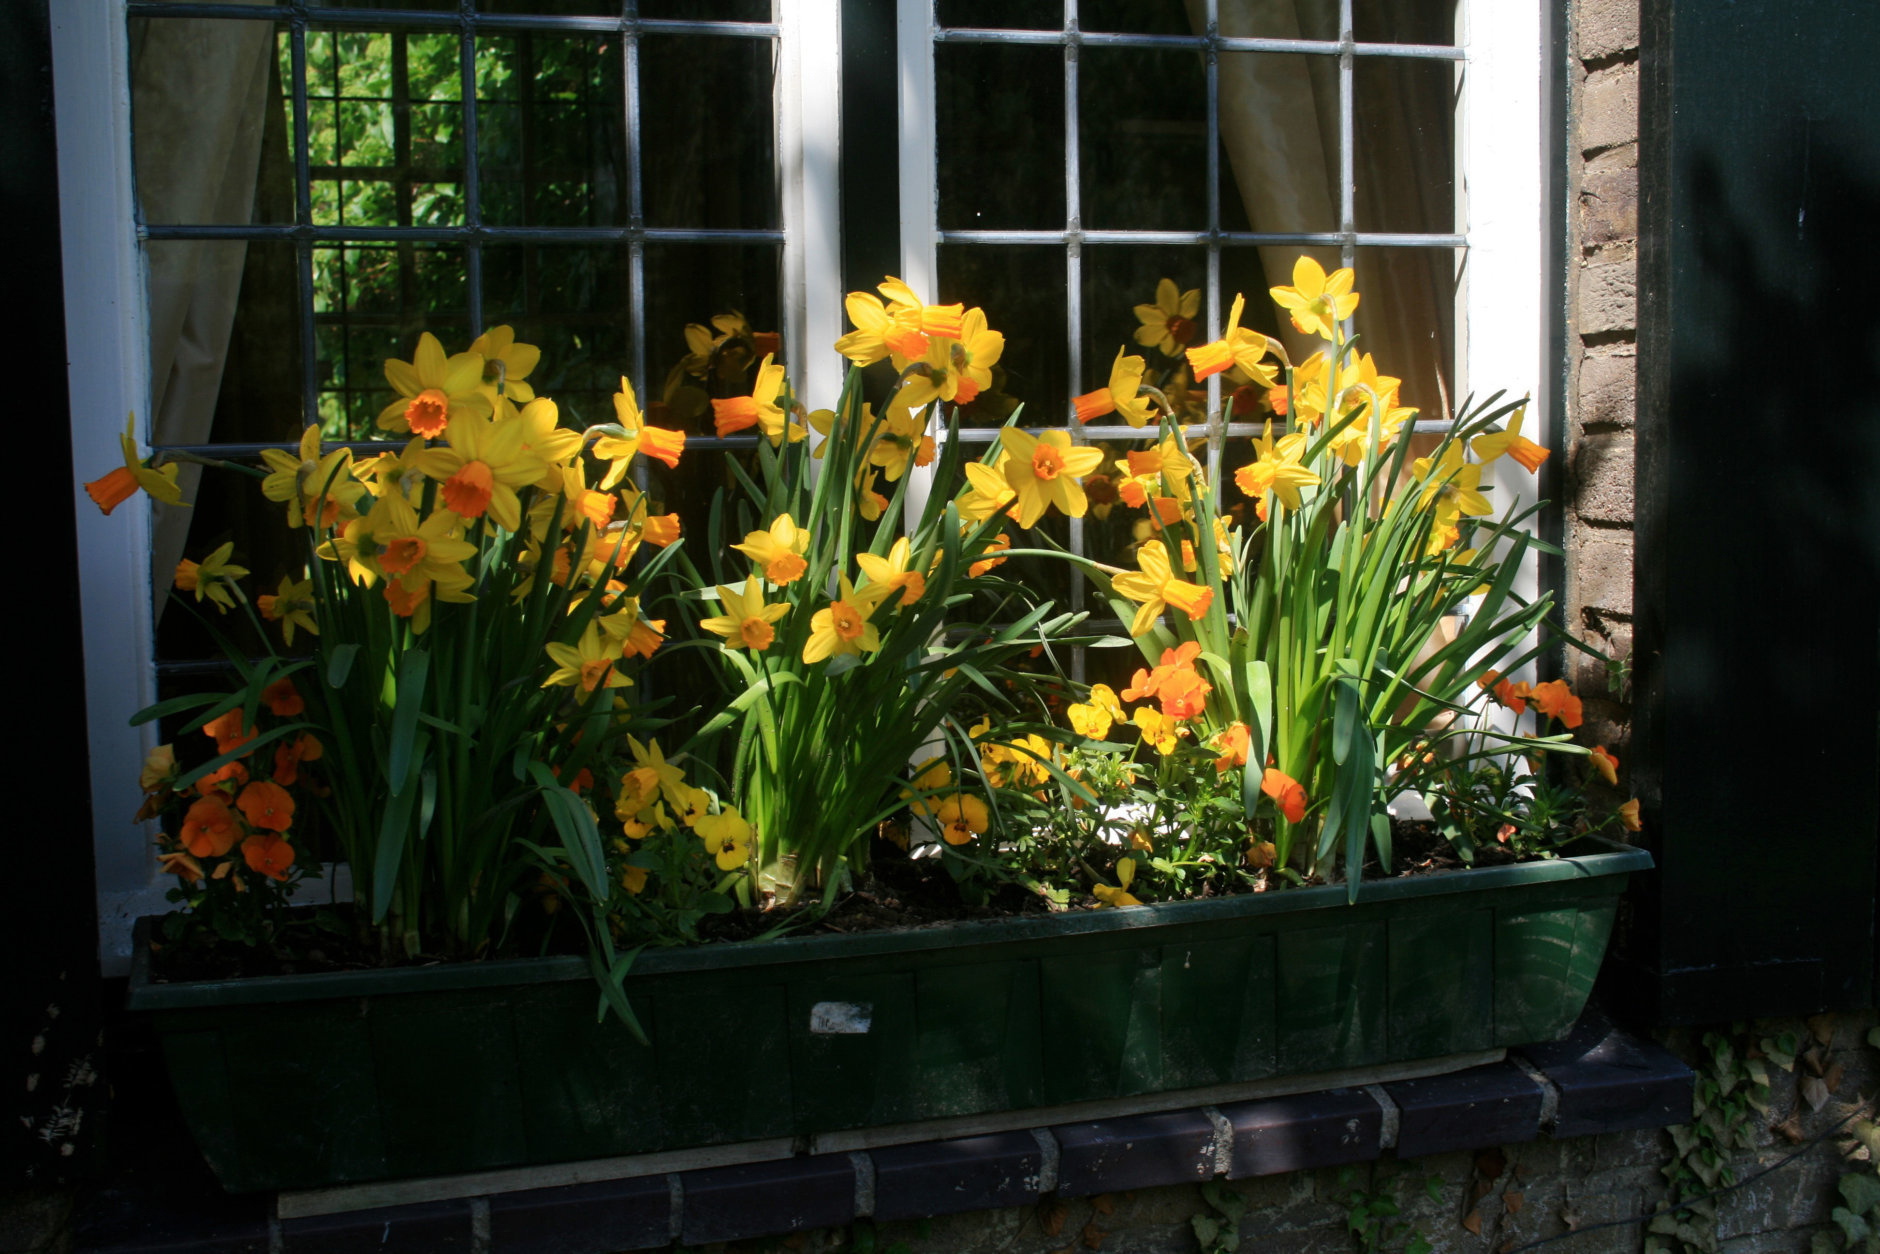 This April 20, 2009 photo shows tall and small flowers that complement one another in this springtime window box assortment in Belgium. This homeowner in the Belgian countryside refreshes her plant selection with the change in seasons. Window boxes are convenient containers that provide color, deliver edibles and supply fragrances. (AP Photo/Dean Fosdick)